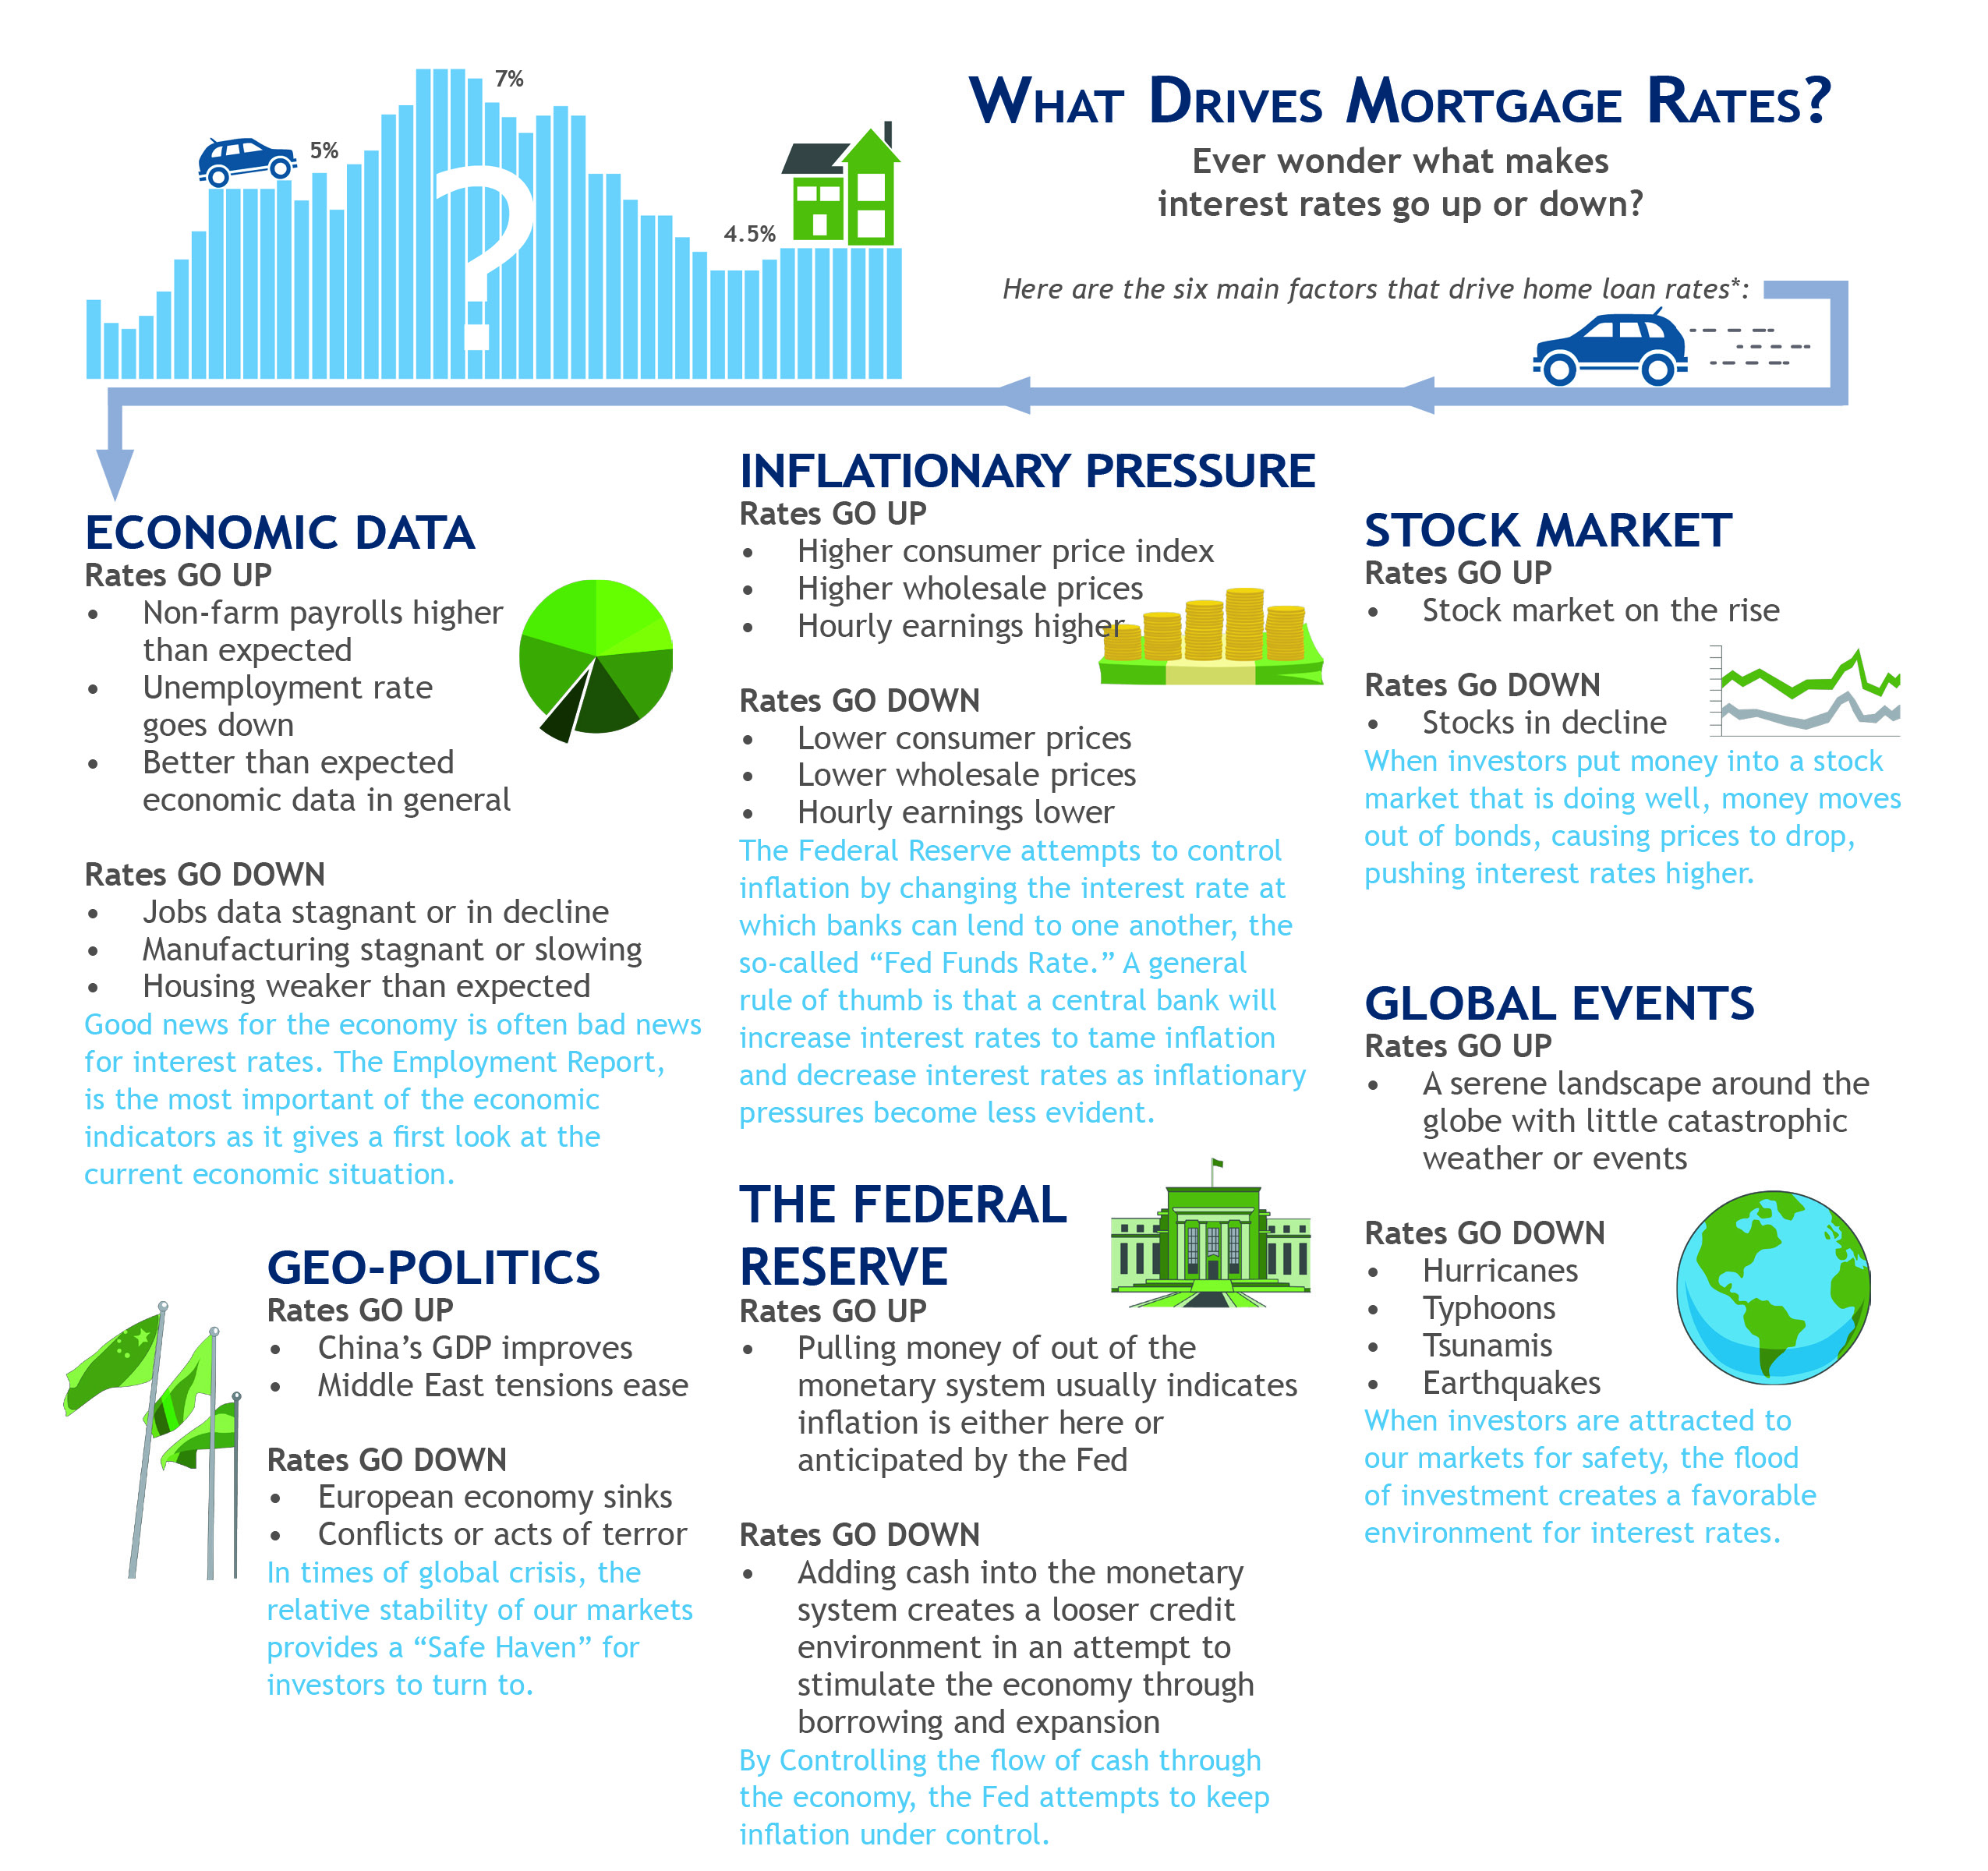 What Drives Interest Rates?